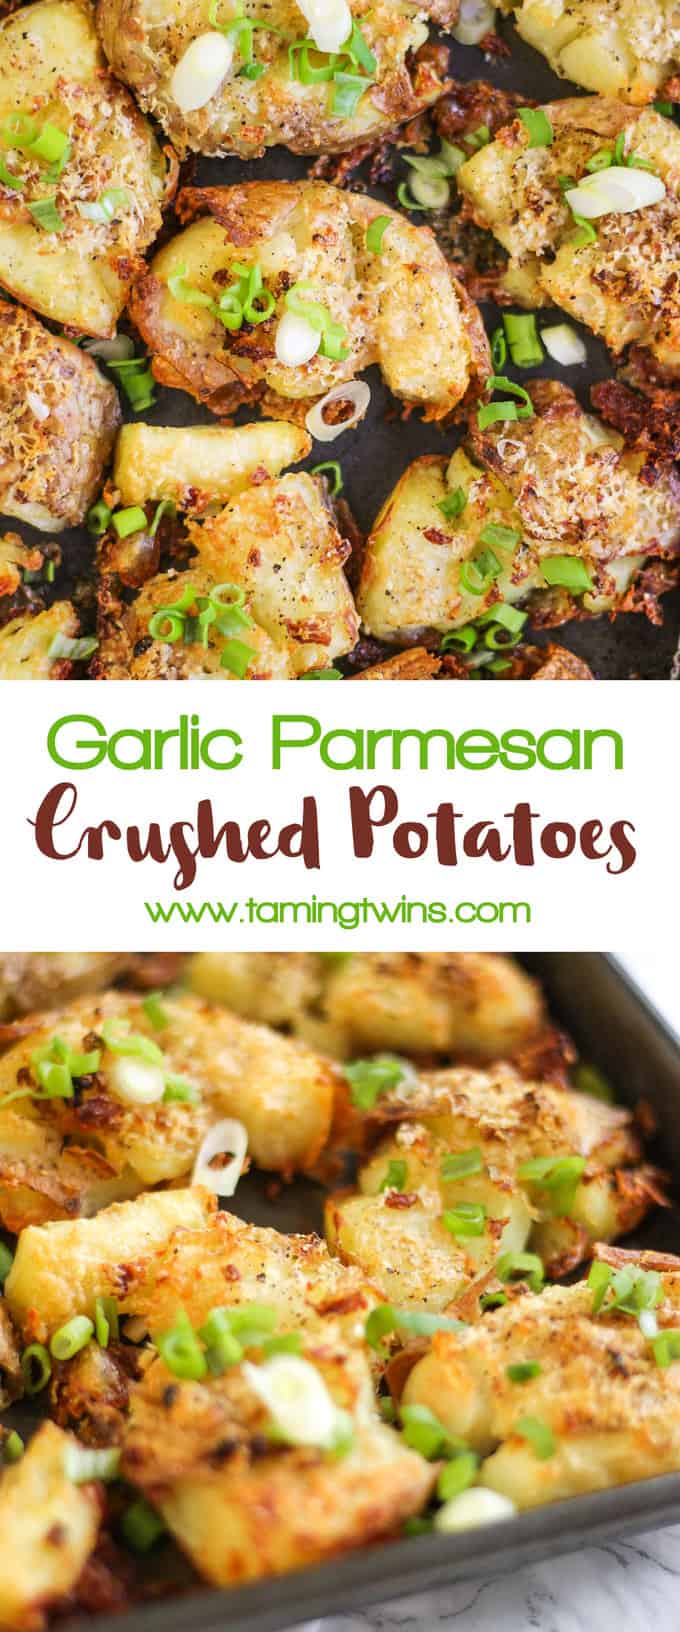 Garlic Parmesan Crushed Potatoes - Crunchy, crispy, crushed new potatoes, smothered in garlic and Parmesan cheese. The ultimate accompaniment side dish.